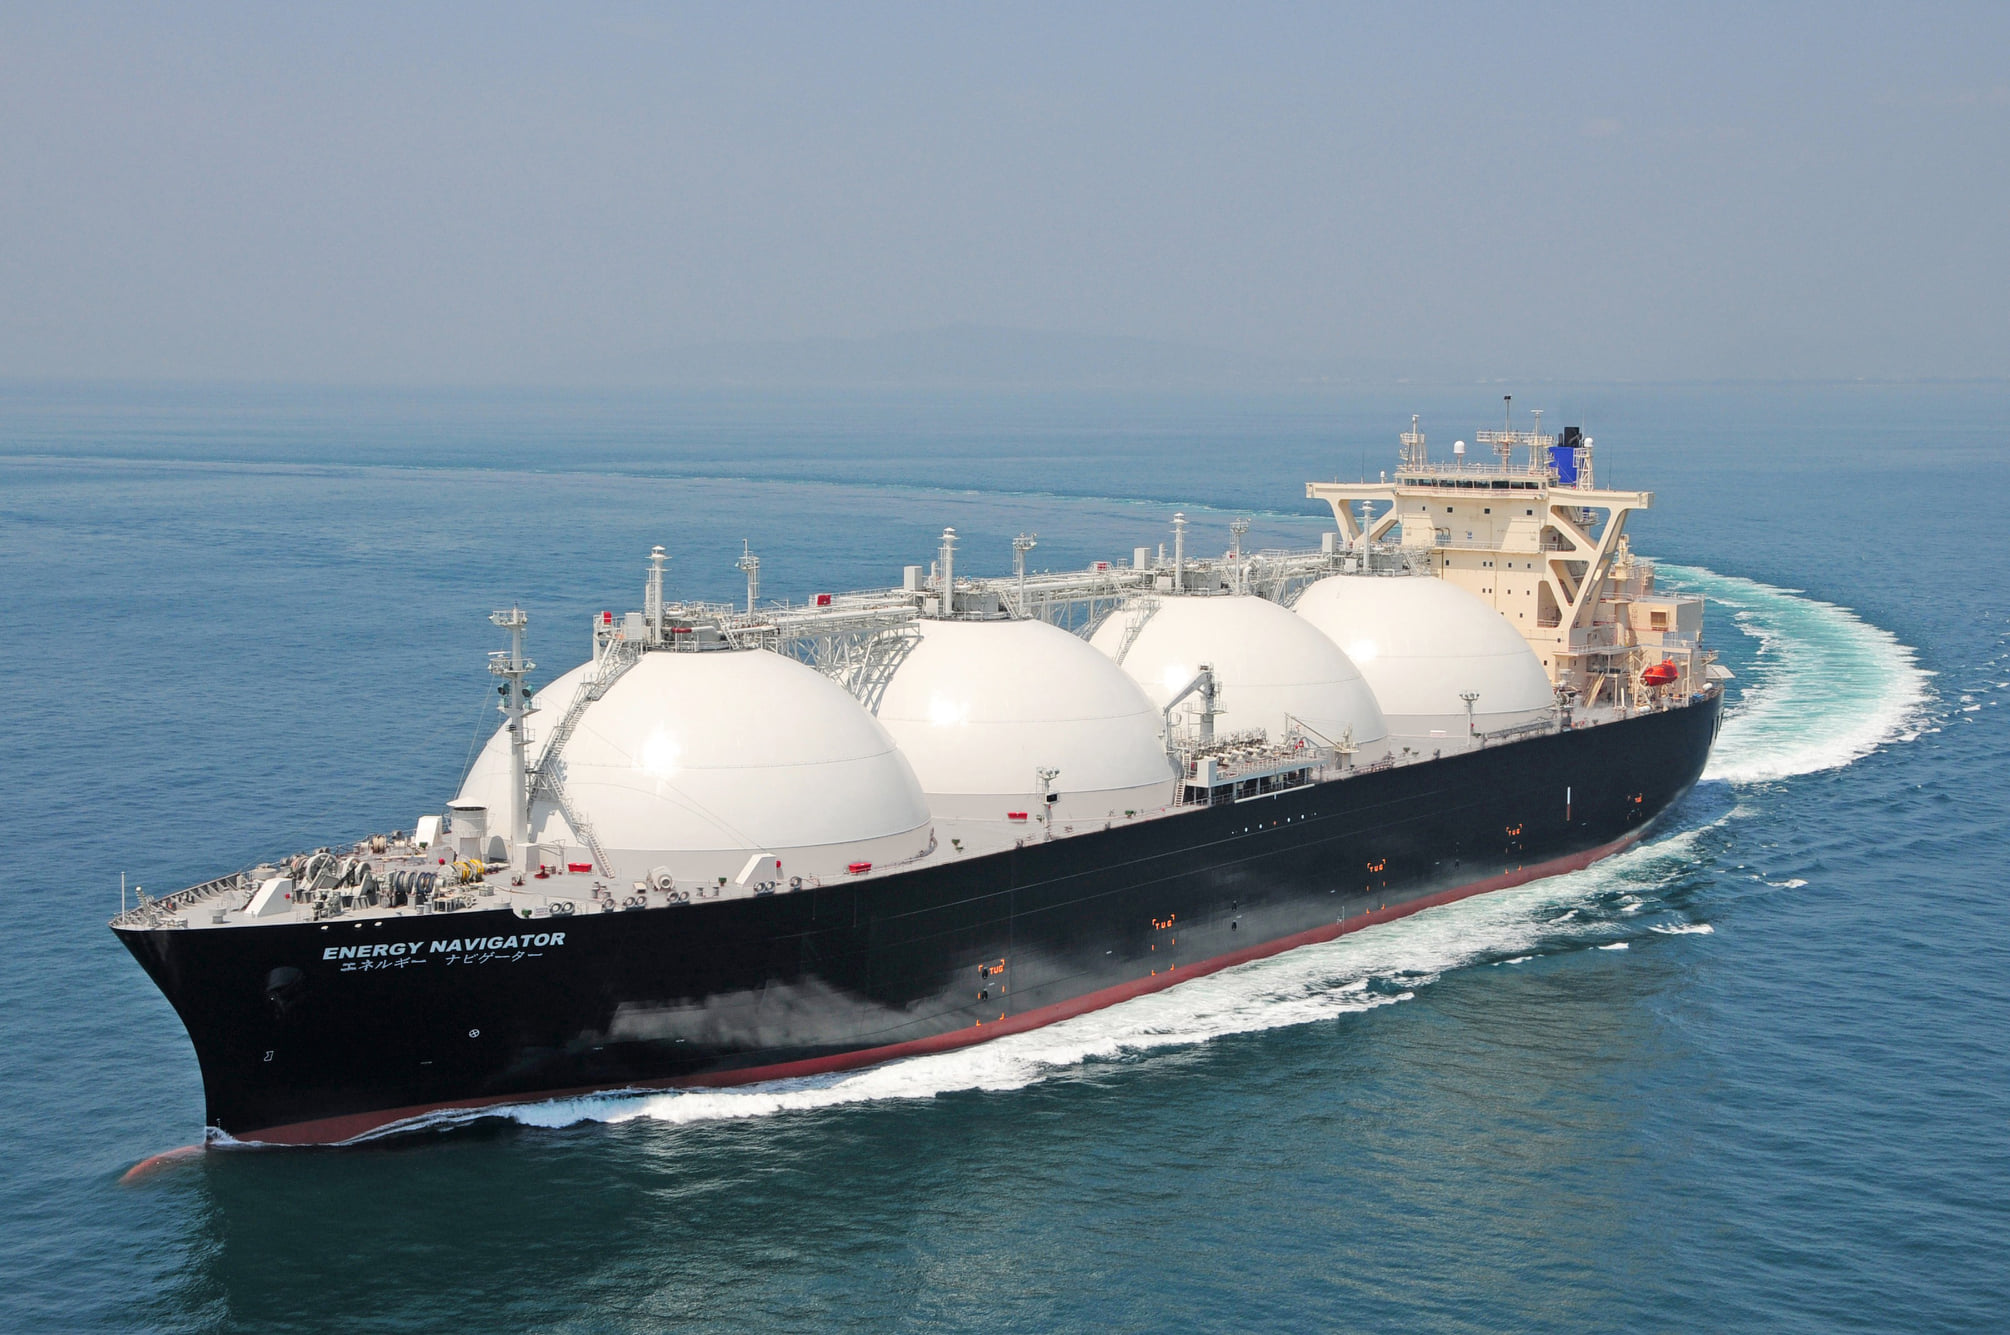 Japanese companies form carbon-neutral LNG buyers alliance